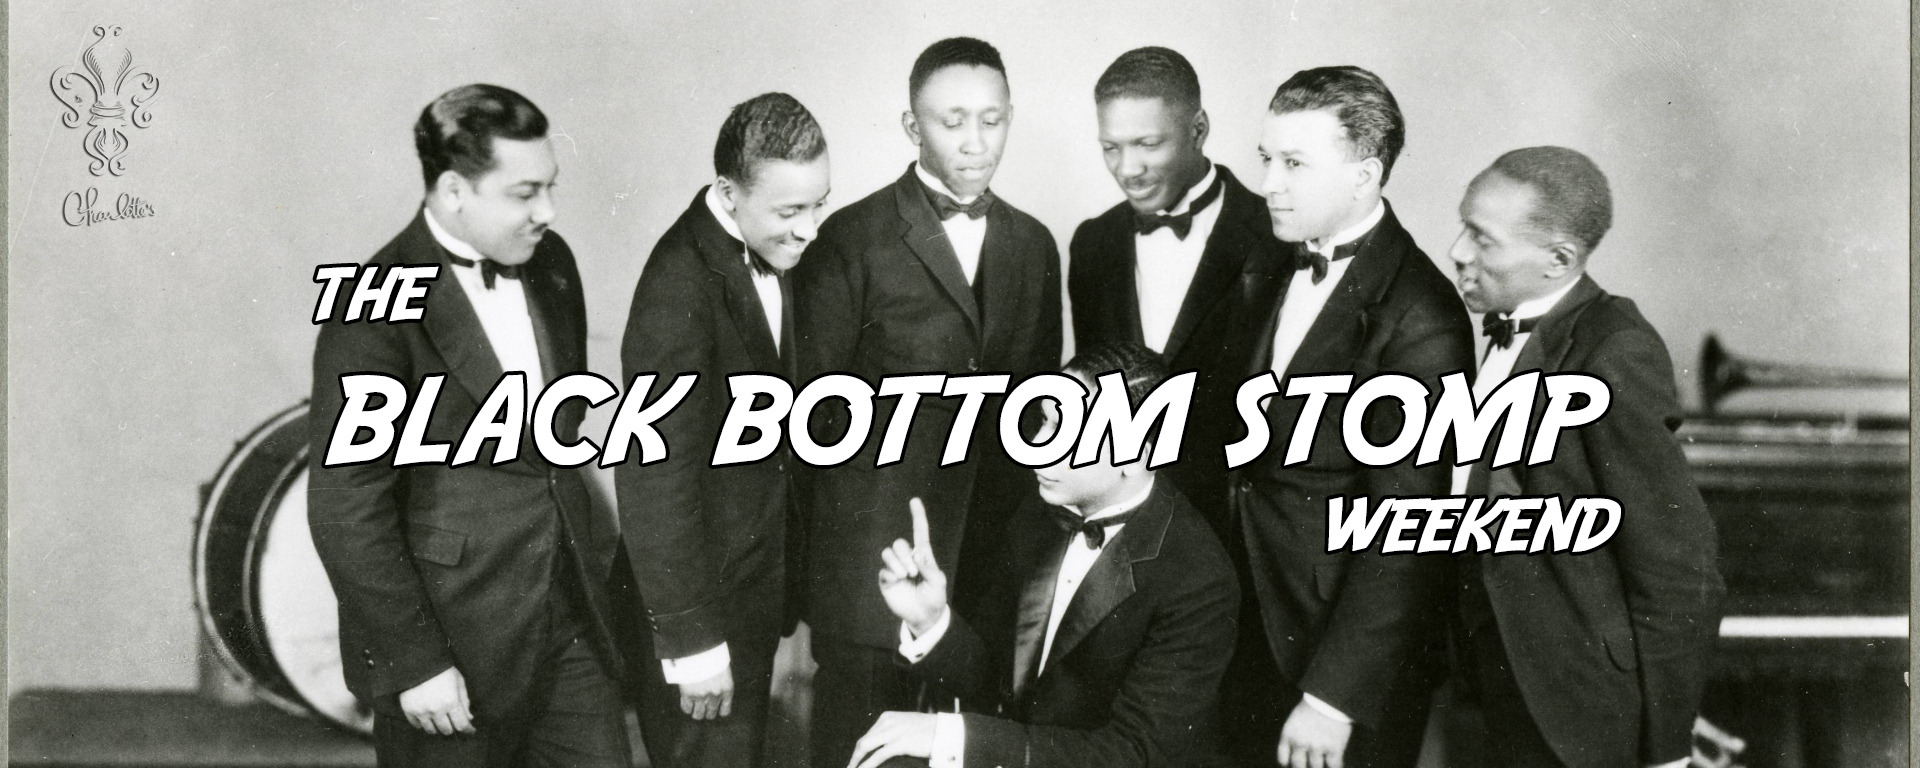 A Tribute to Chris Laybourne - The Black Bottom Stomp Weekend